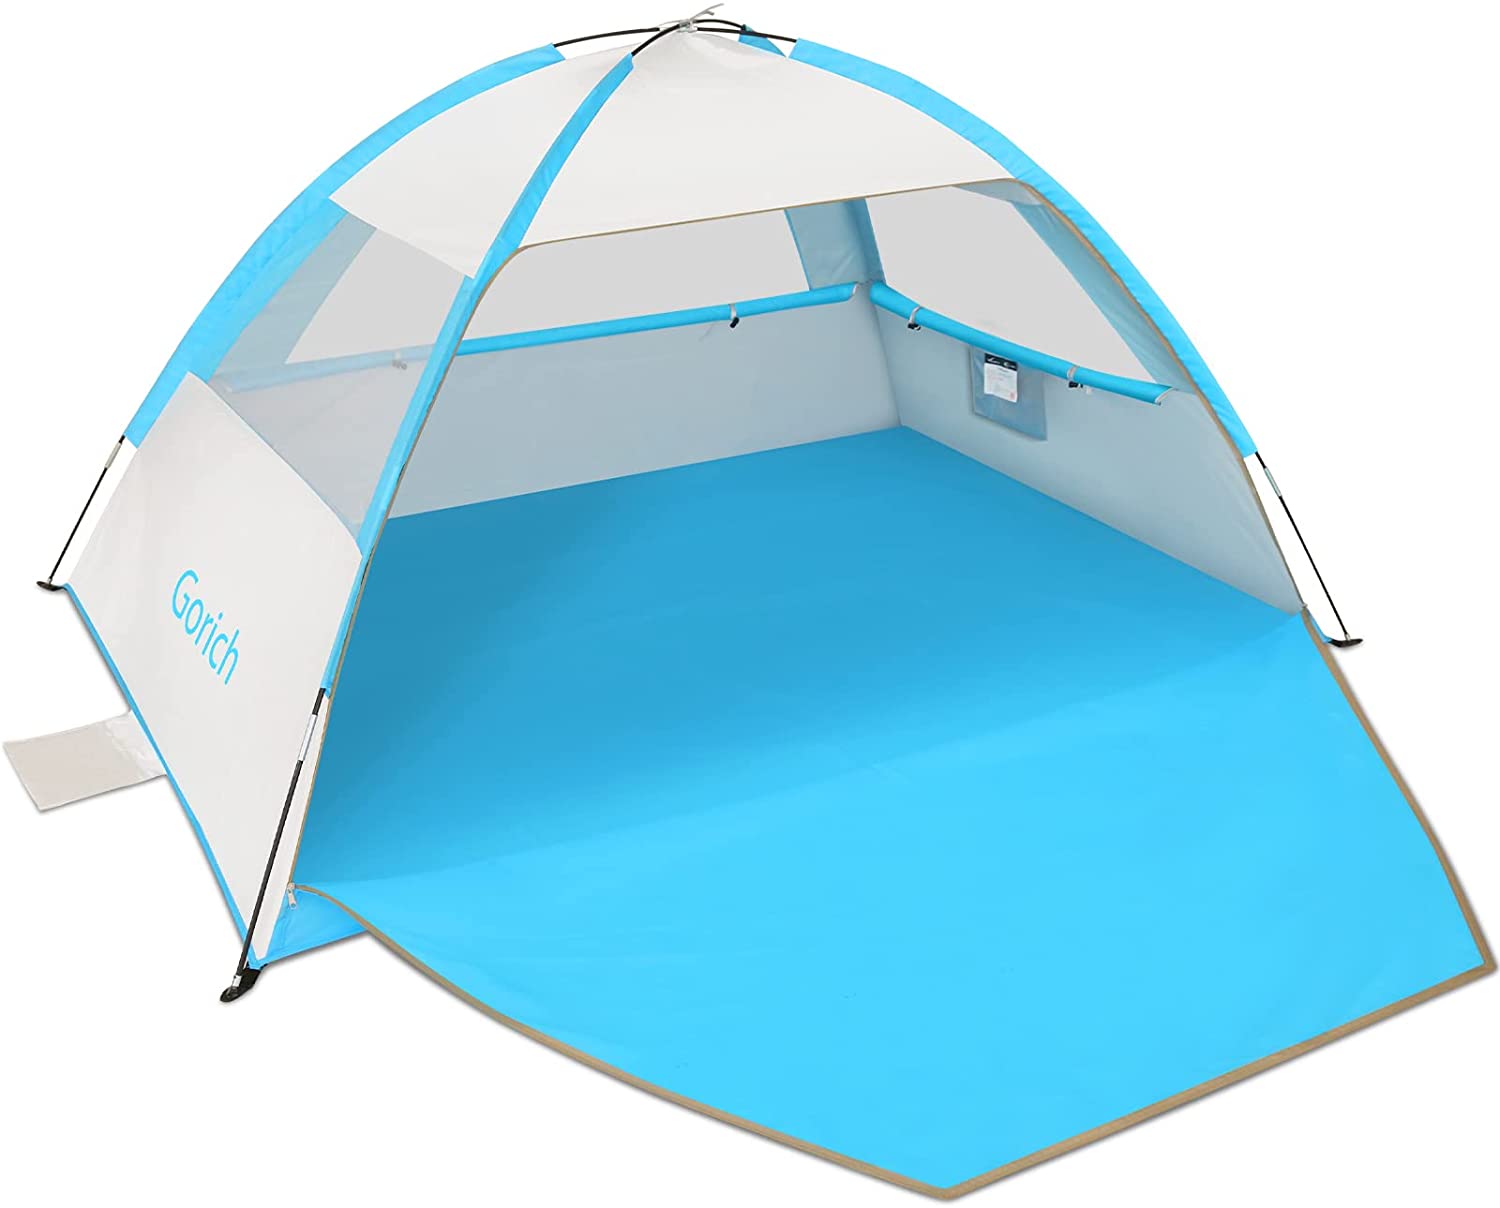 Review of - Gorich Beach Tent, Beach Shade Tent for 3/4-5/6-7 Person